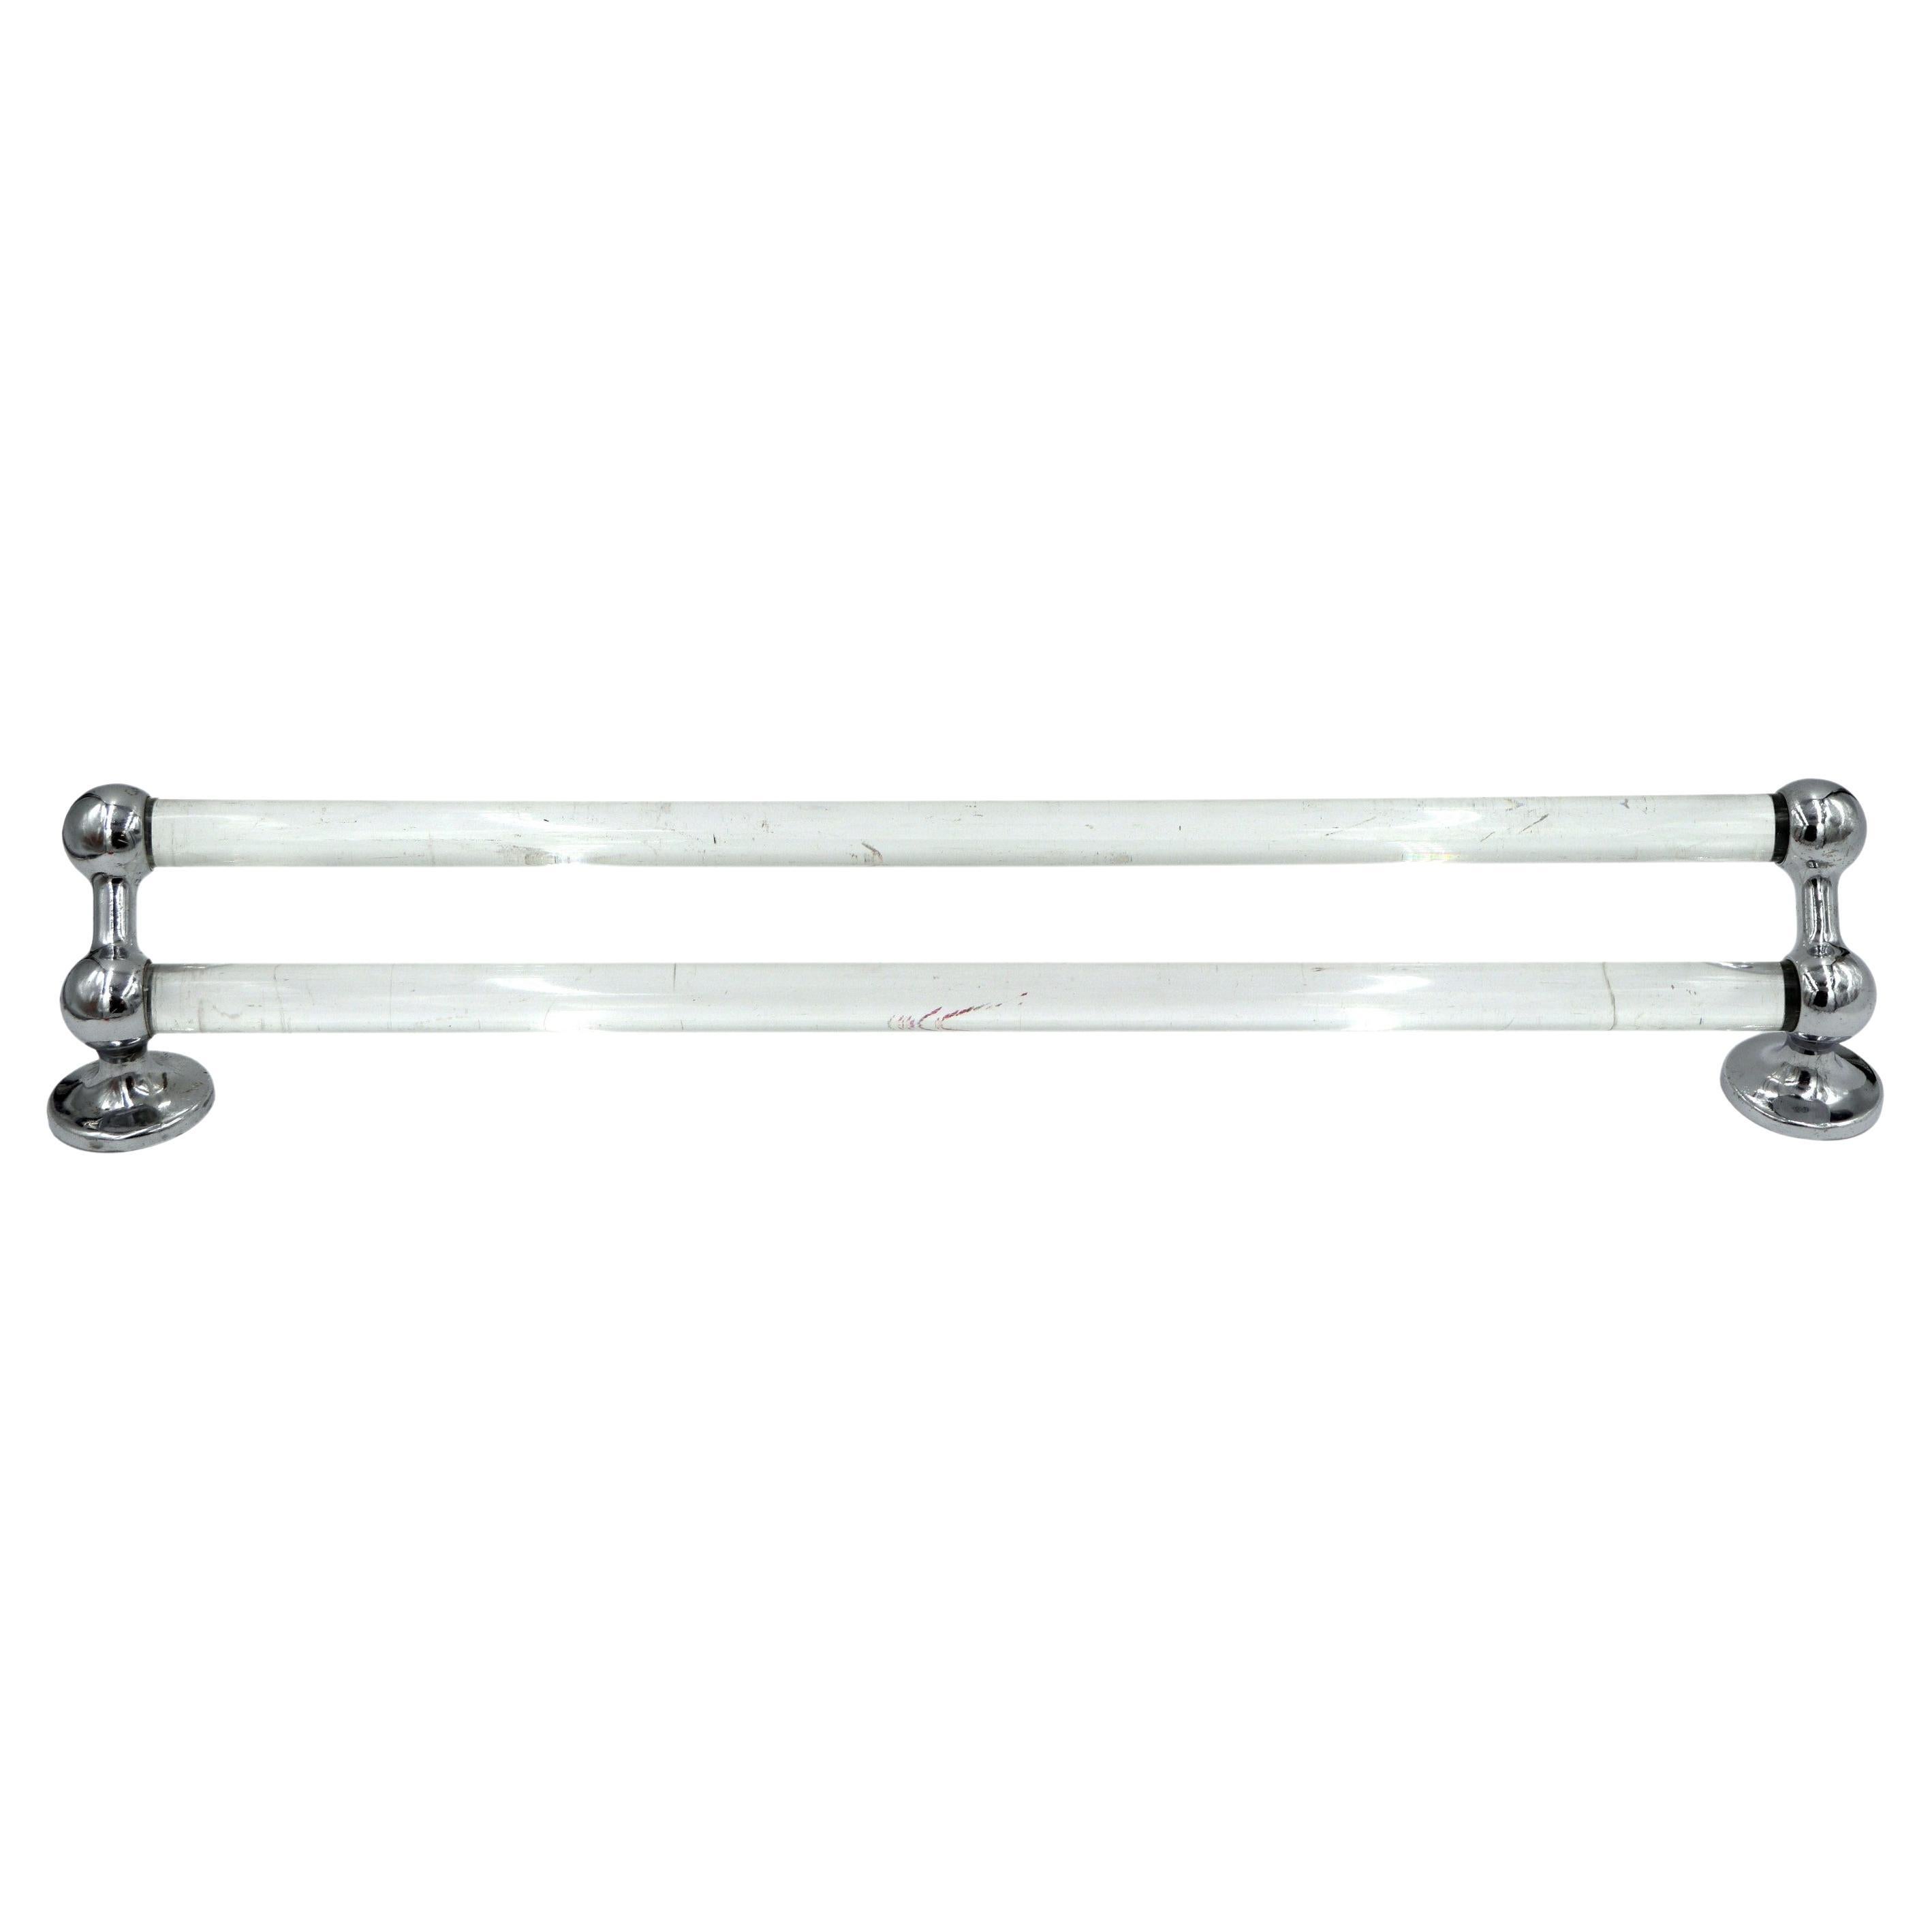 Double Towel Bar Rack w/ Lucite Bars and Chrome Plated Hardware